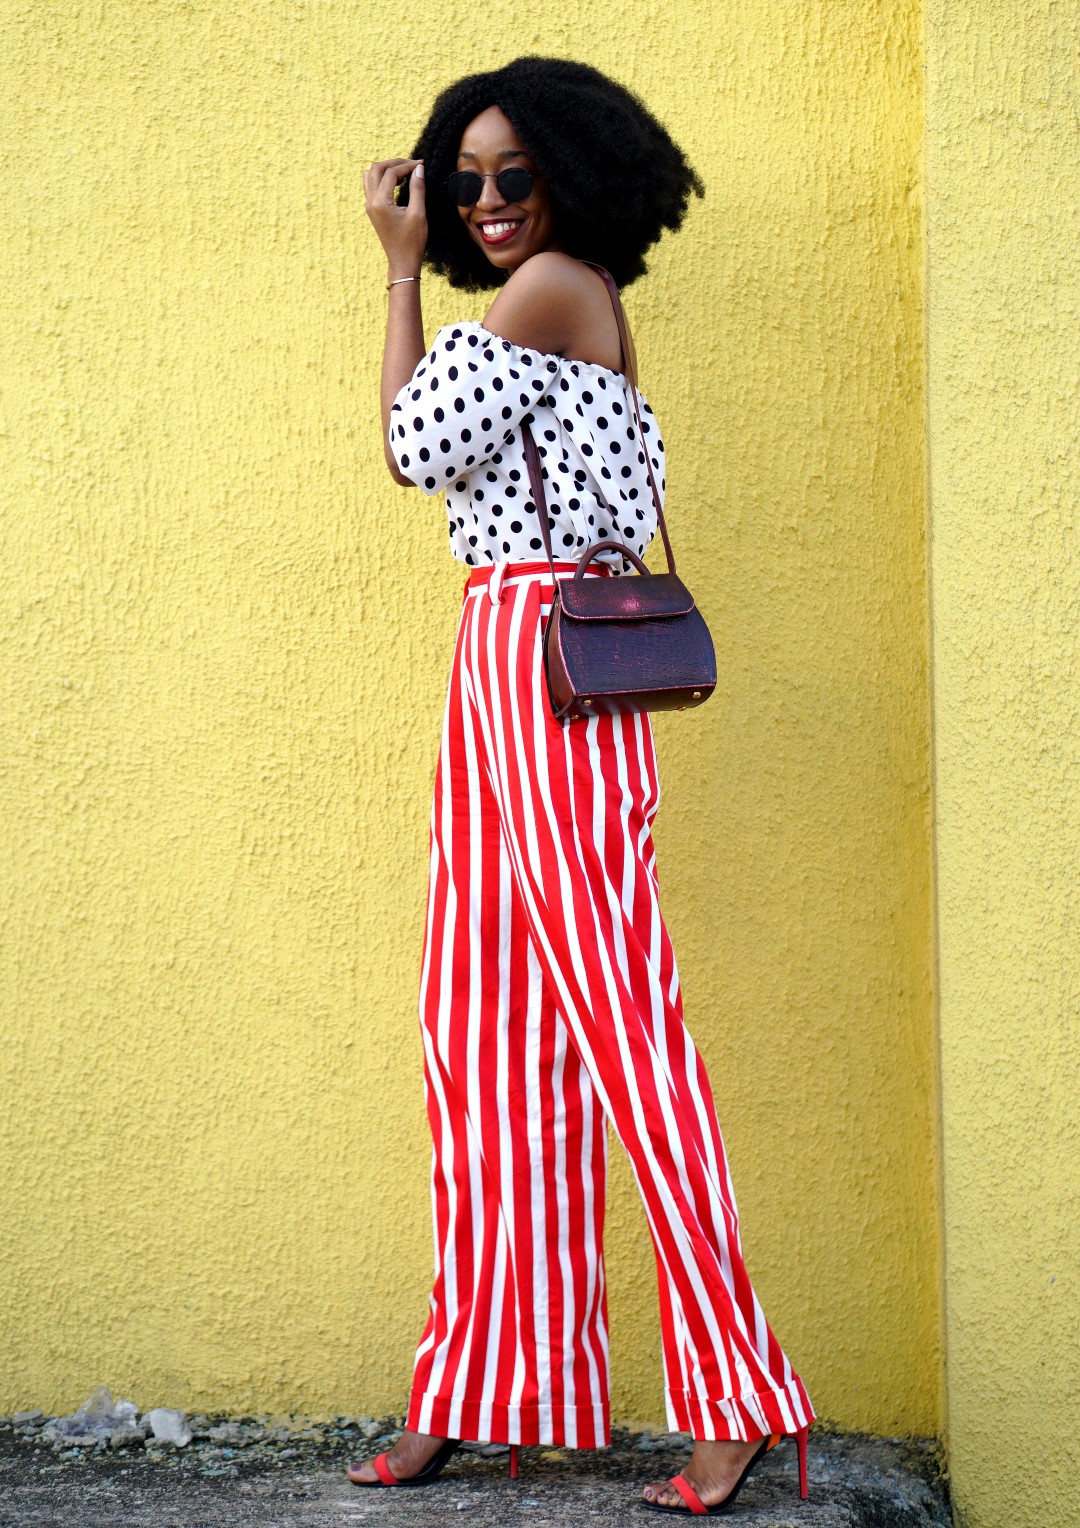 Mixed prints fashion trend : Blogger Cassie Daves In a polka dot off shoulder top and striped pants